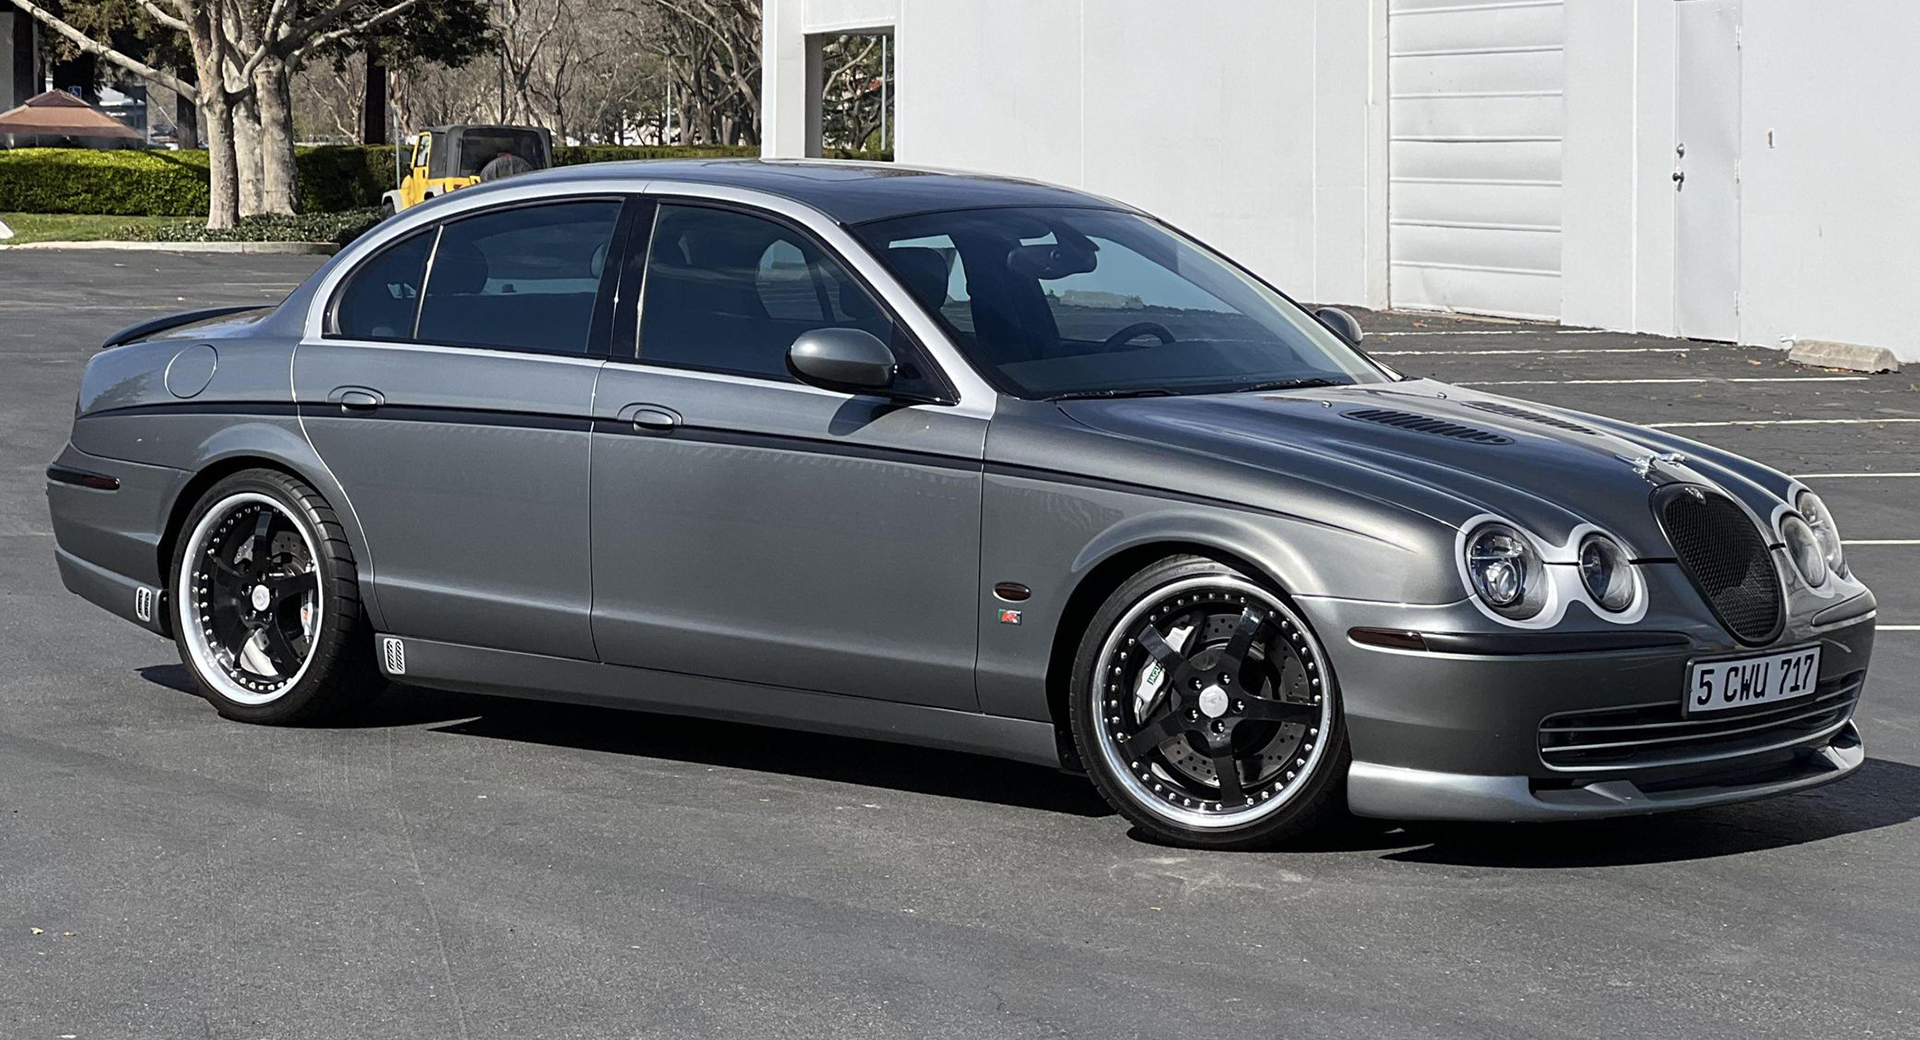 Any Love For A Modded Jaguar S-Type R With A Supercharged V8? | Carscoops